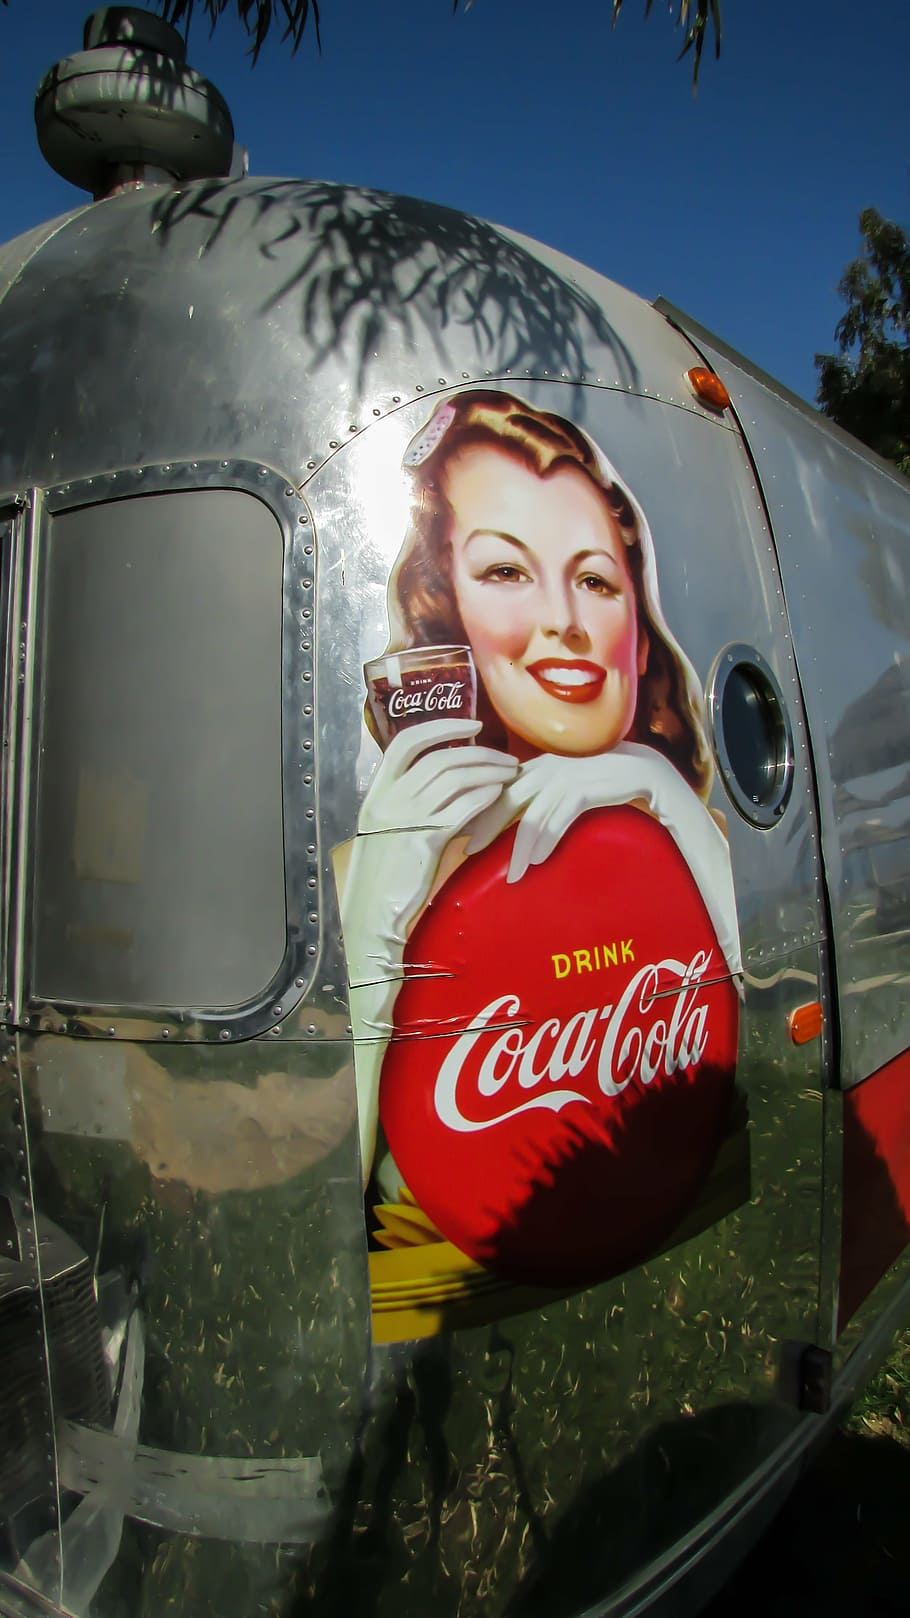 caravan, trailer, soda fountain, mobile, vintage, promotion, tourism, holiday, vacation, advertisment